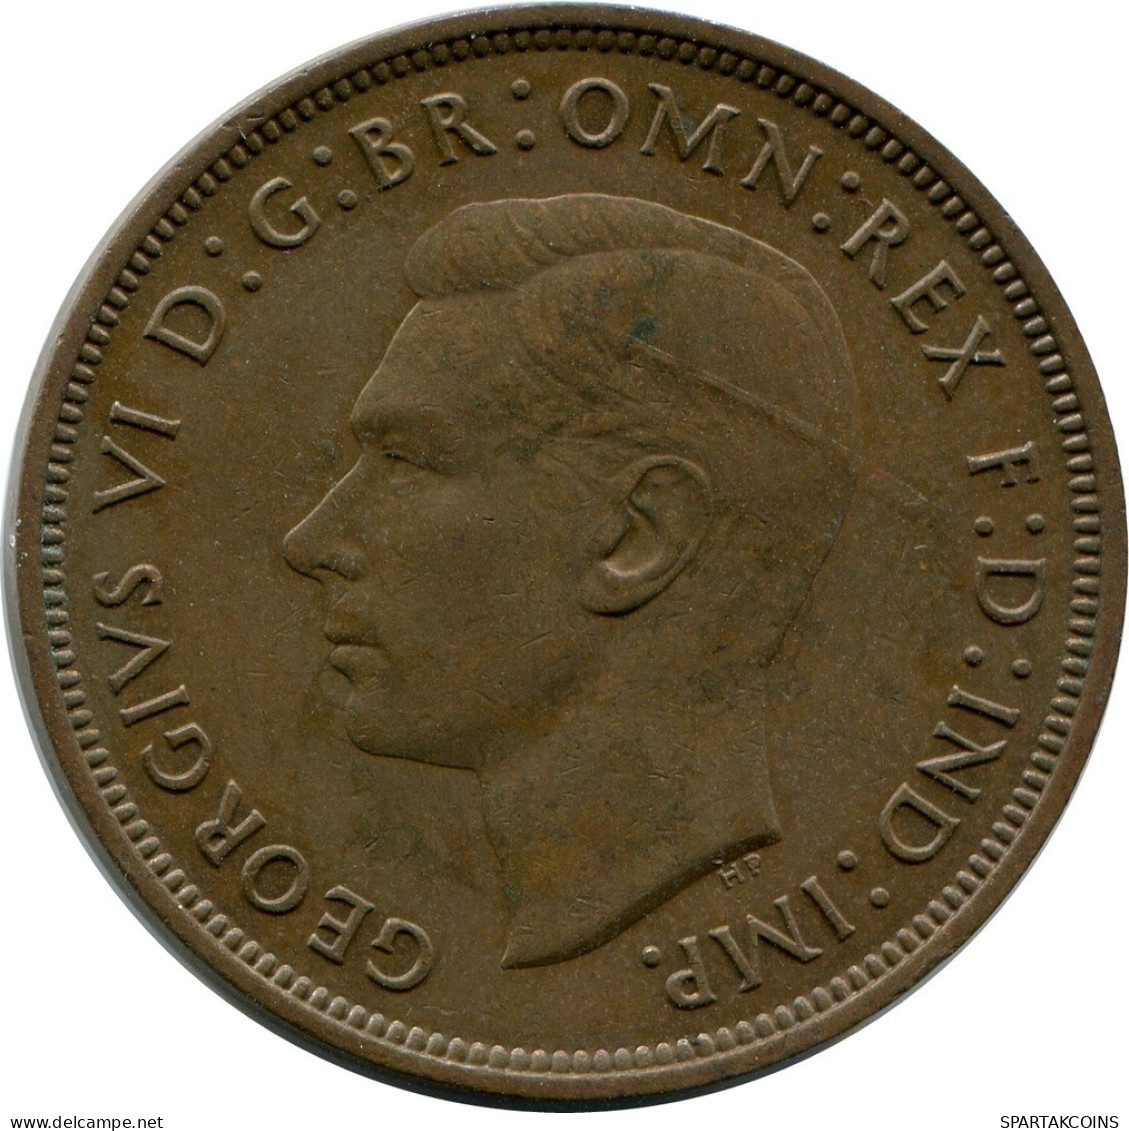 PENNY 1938 UK GREAT BRITAIN Coin #BB022.U.A - D. 1 Penny